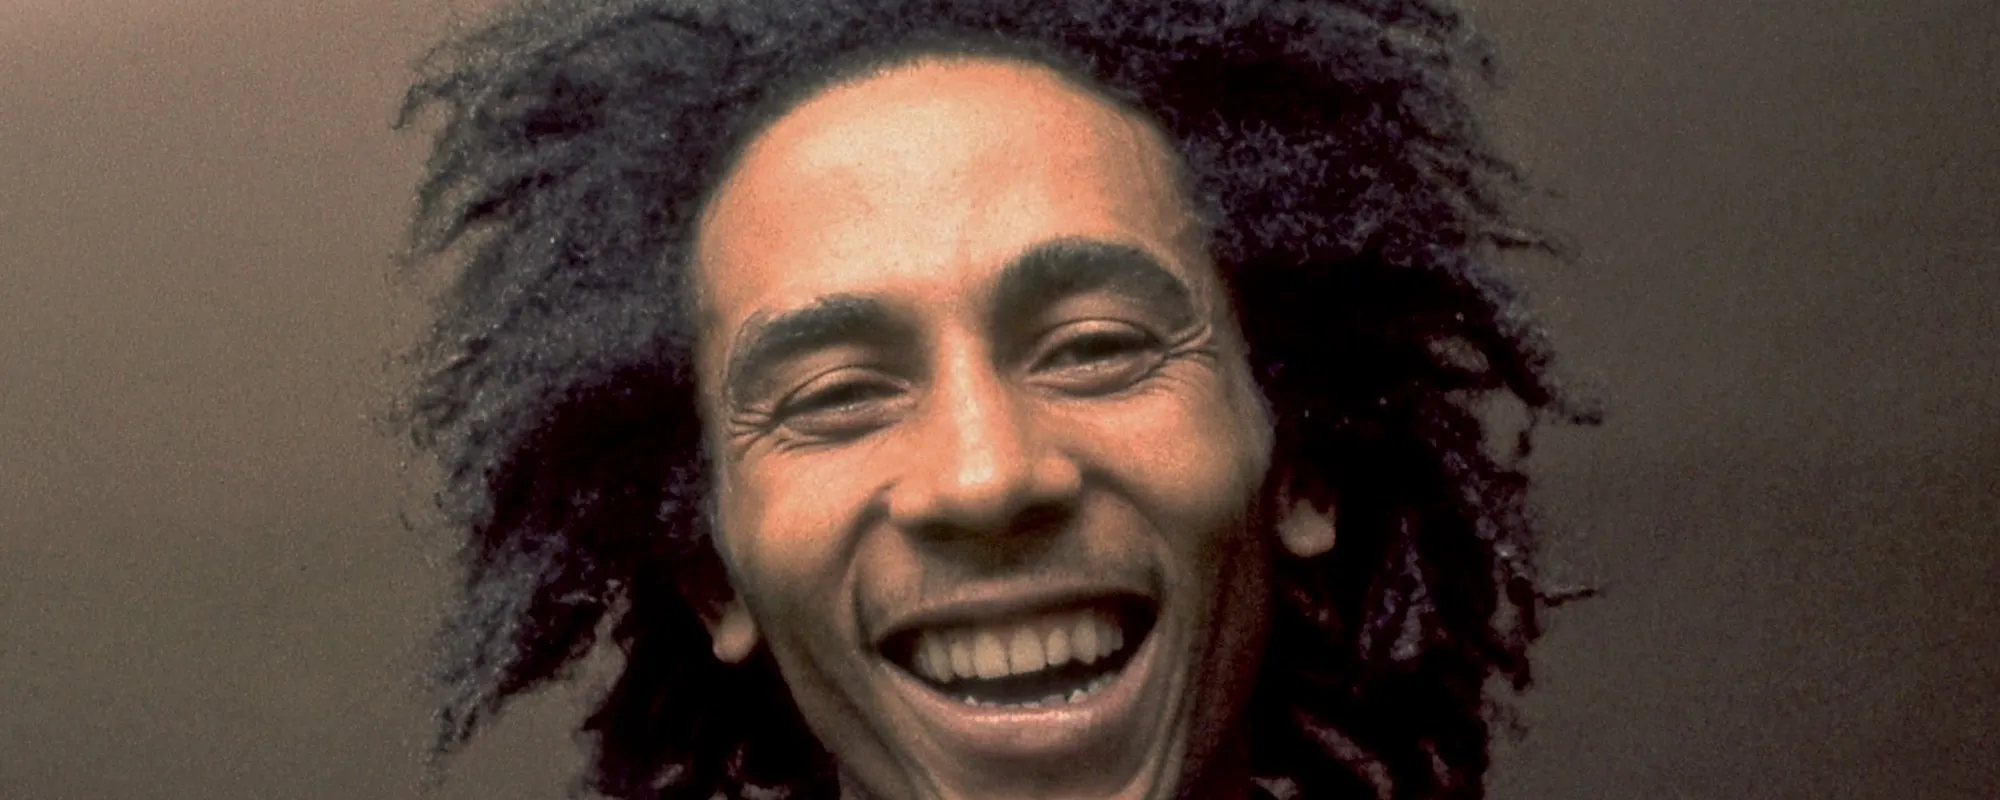 New Bob Marley Immersive Exhibit Launches Early Next Year